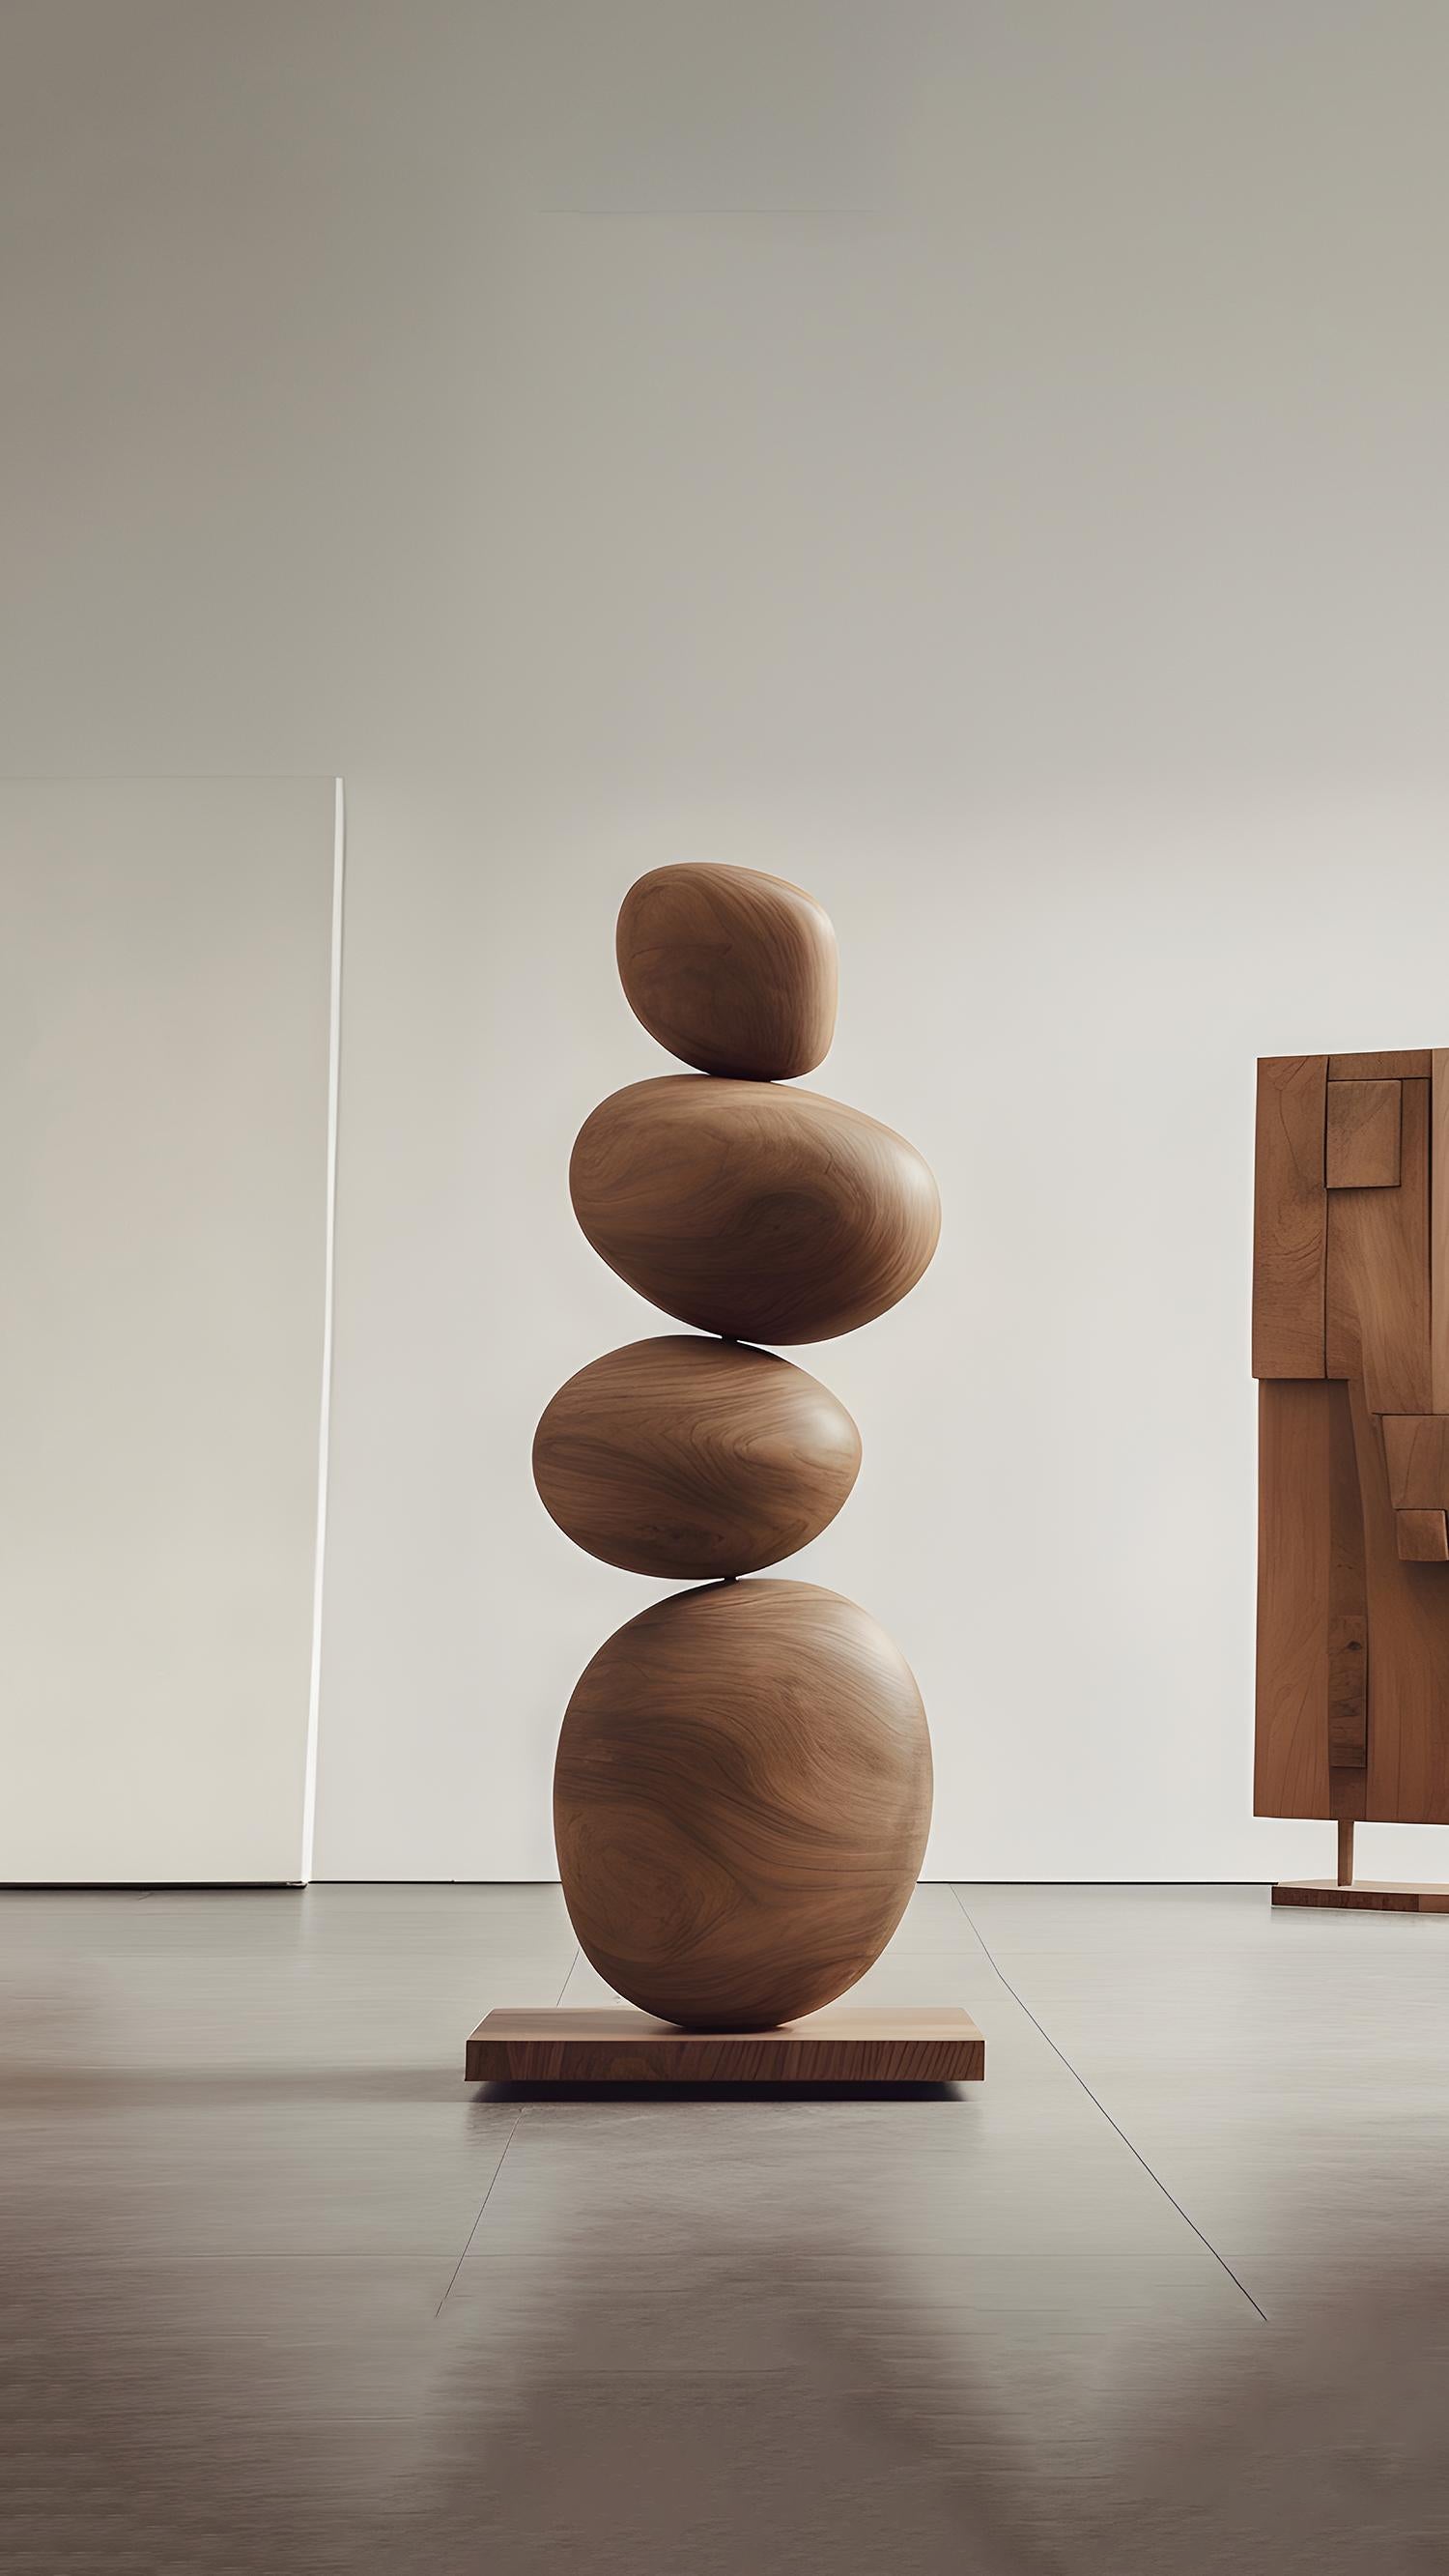 Hand-Crafted Still Stand No13: Tall Wooden Totem Sculpture by NONO, Escalona Design For Sale